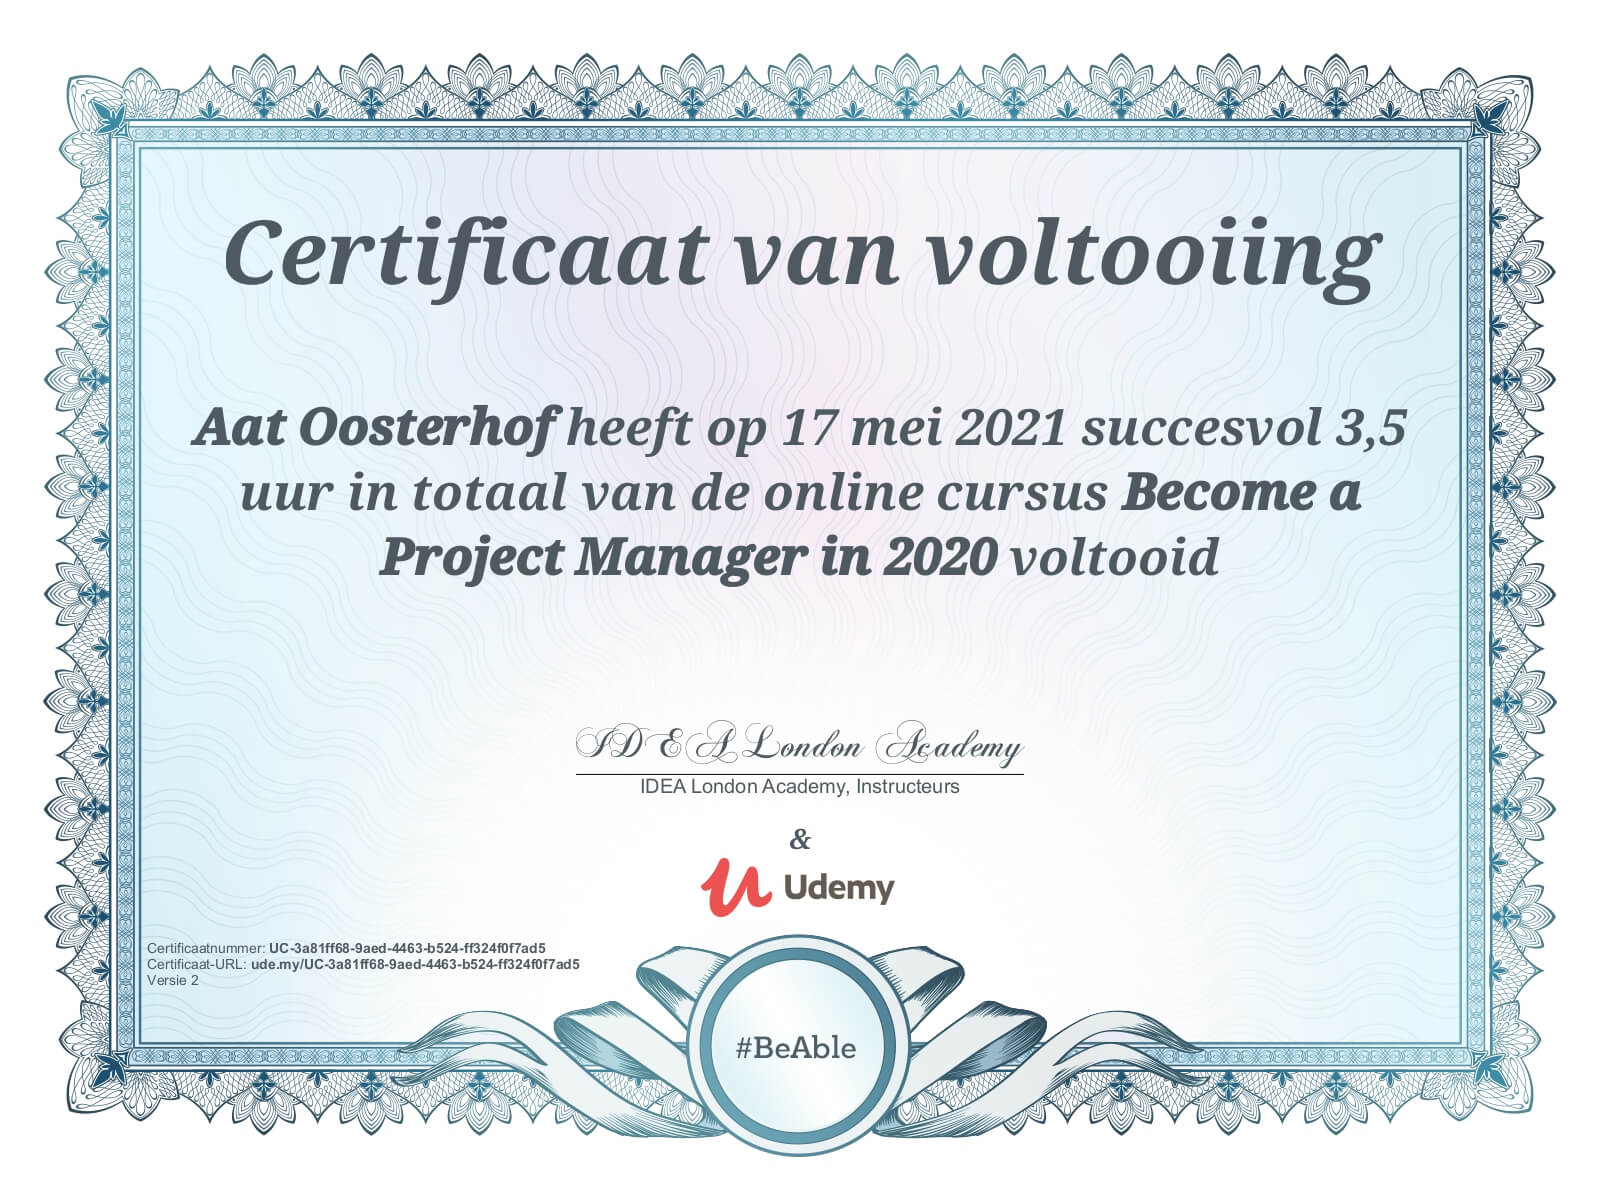 Udemy - IDEA London Academy Become a Project Manager 2020 Aat Oosterhof